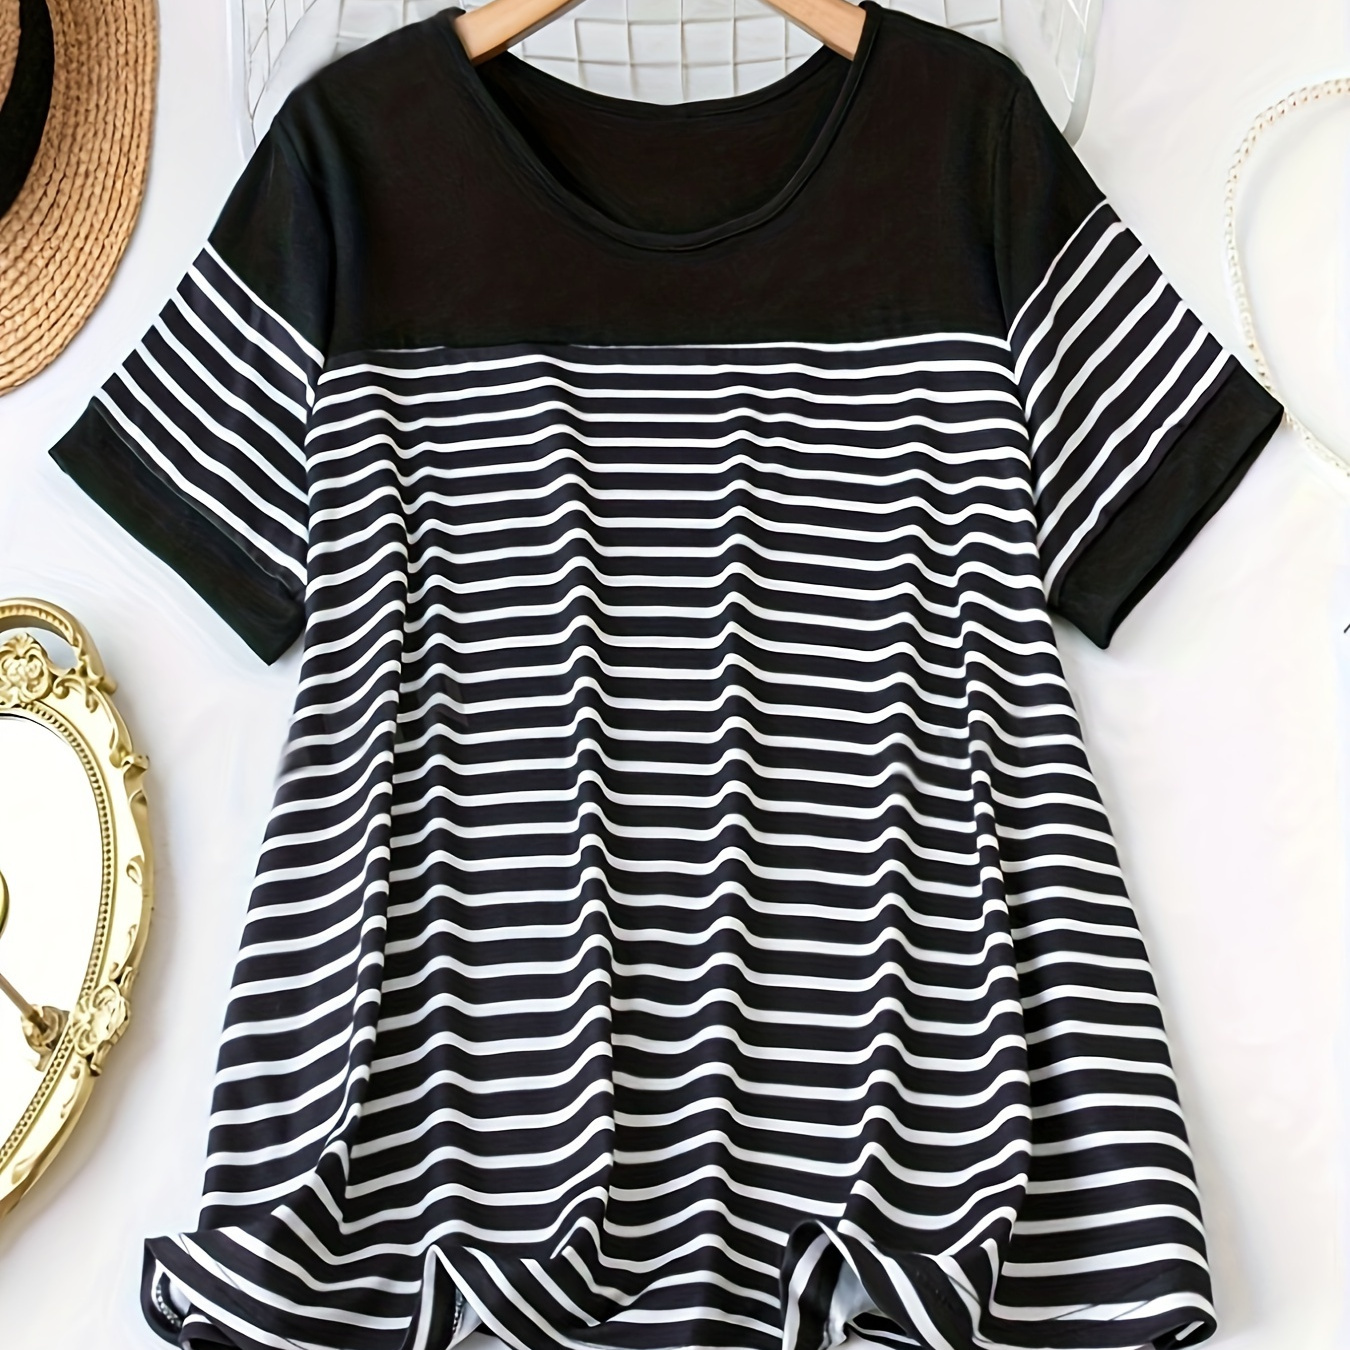 

Plus Size Stripes Print T-shirt, Casual Crew Neck Short Sleeve T-shirt For Spring & Summer, Women's Plus Size Clothing